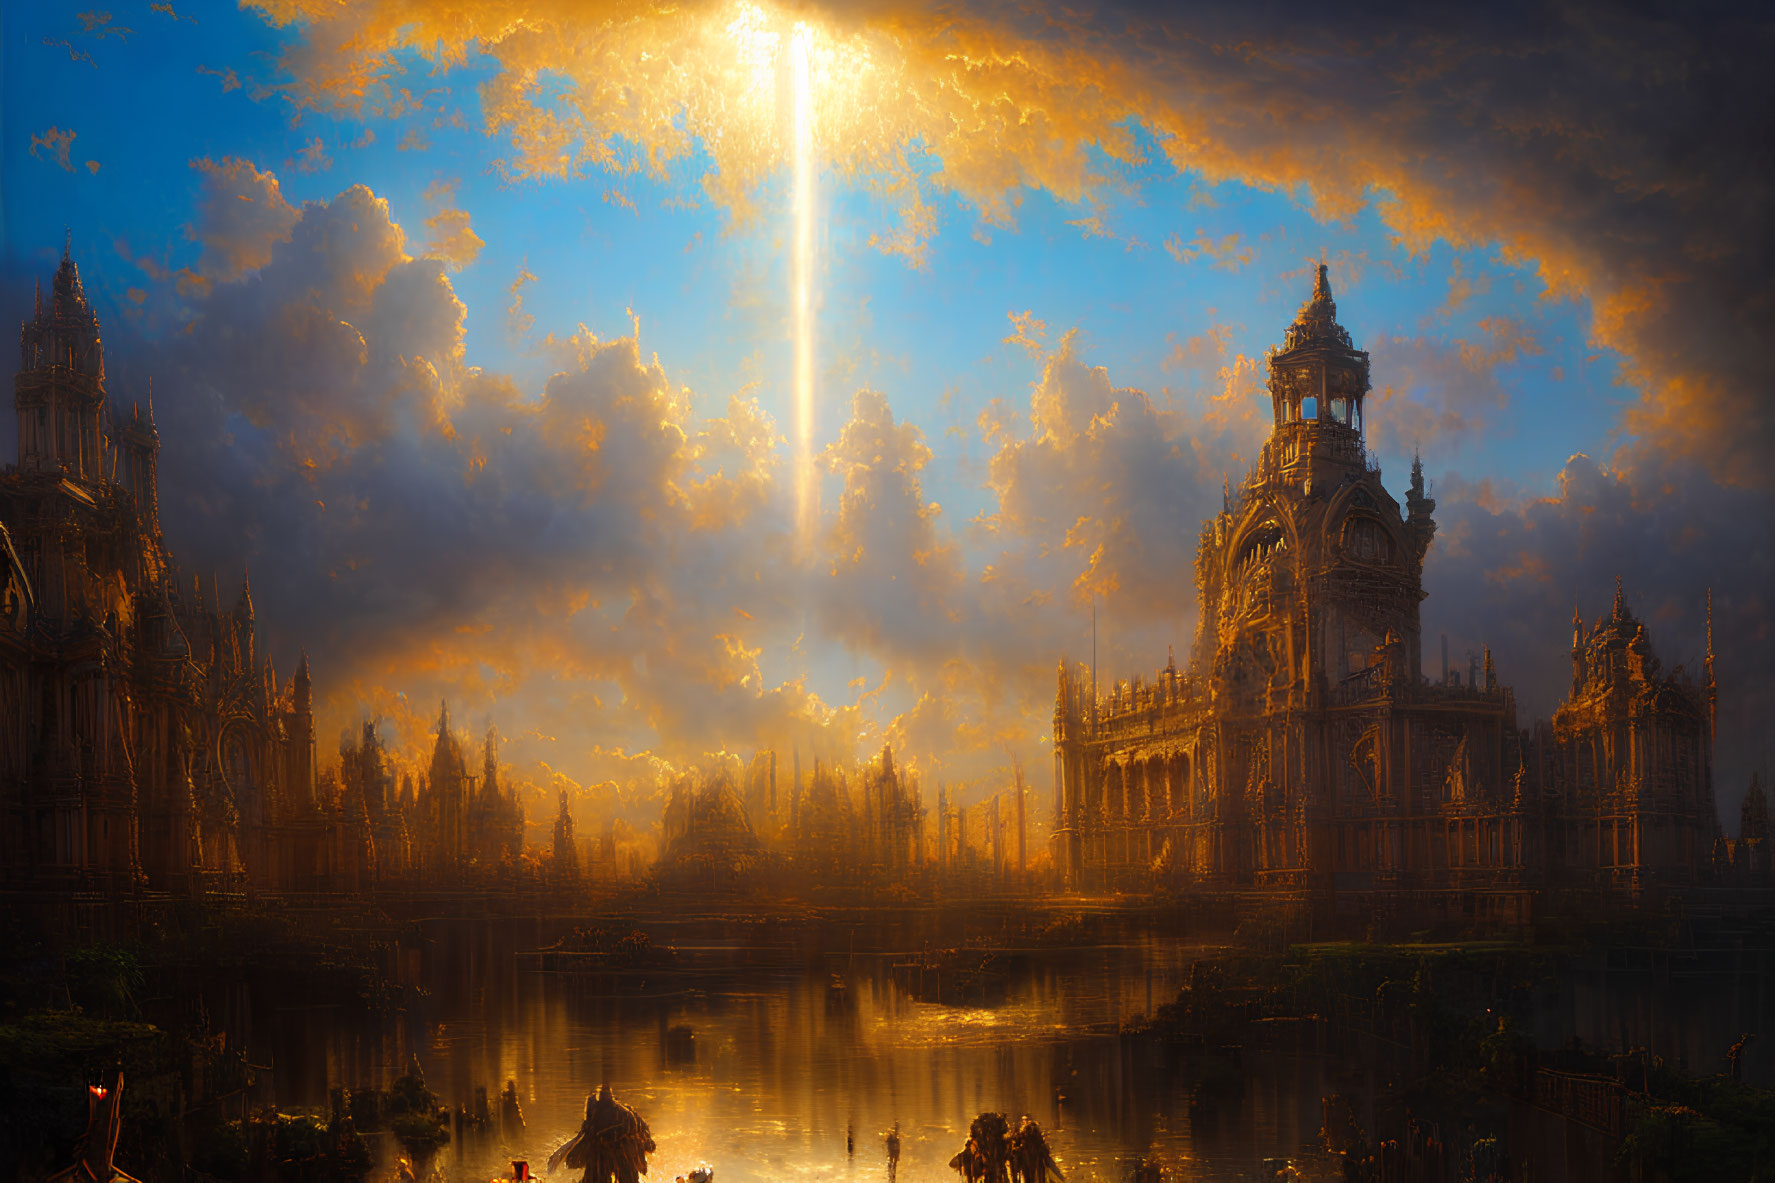 Fantasy cityscape with Gothic architecture by tranquil river